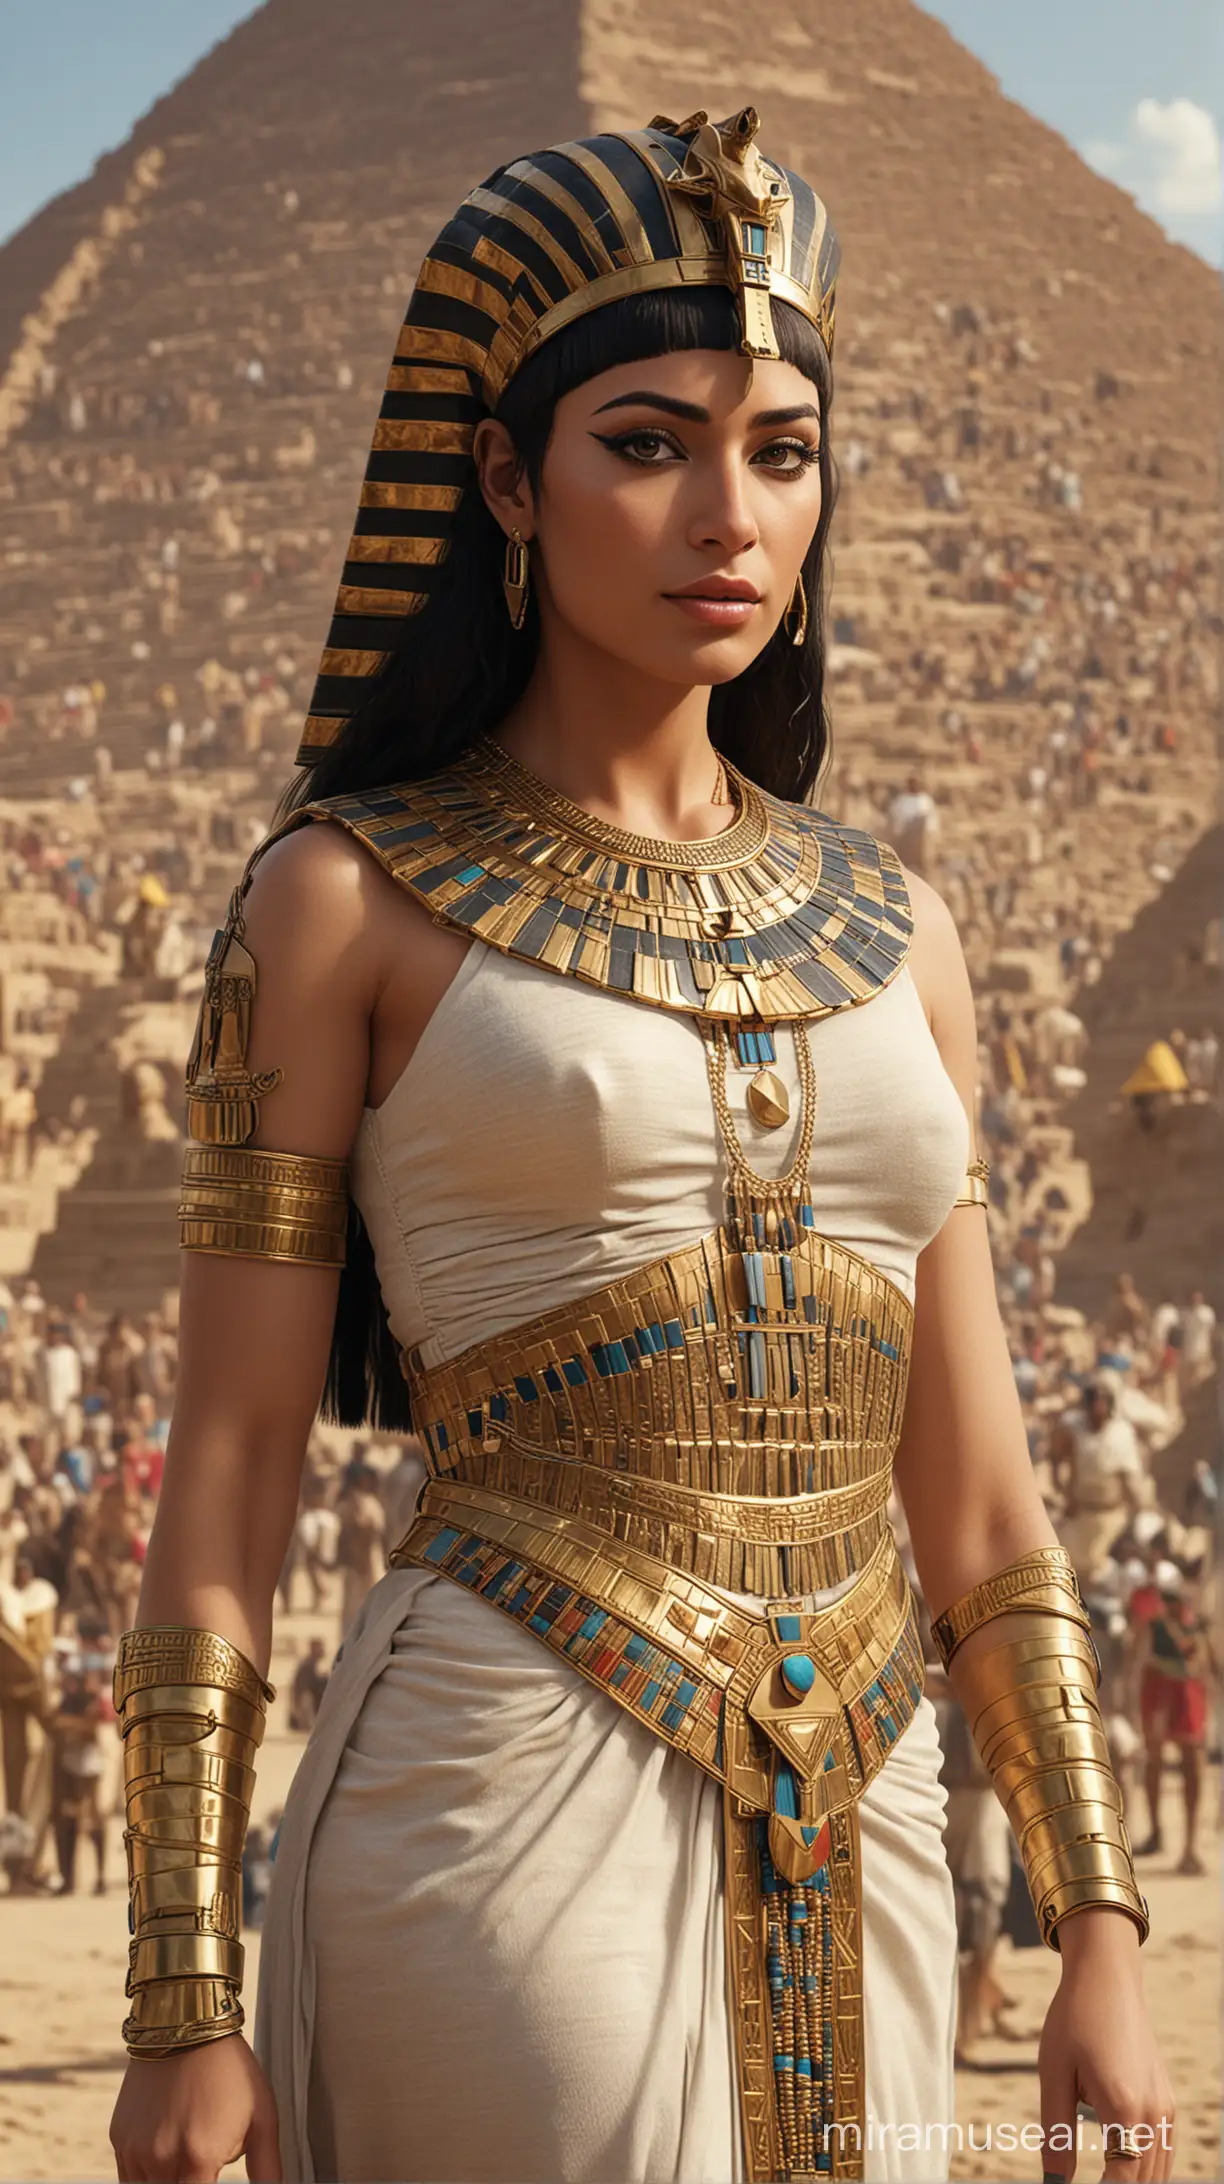 Cleopatra Queen of Egypt with Security and Servants by Great Pyramid Hyper Realistic Image